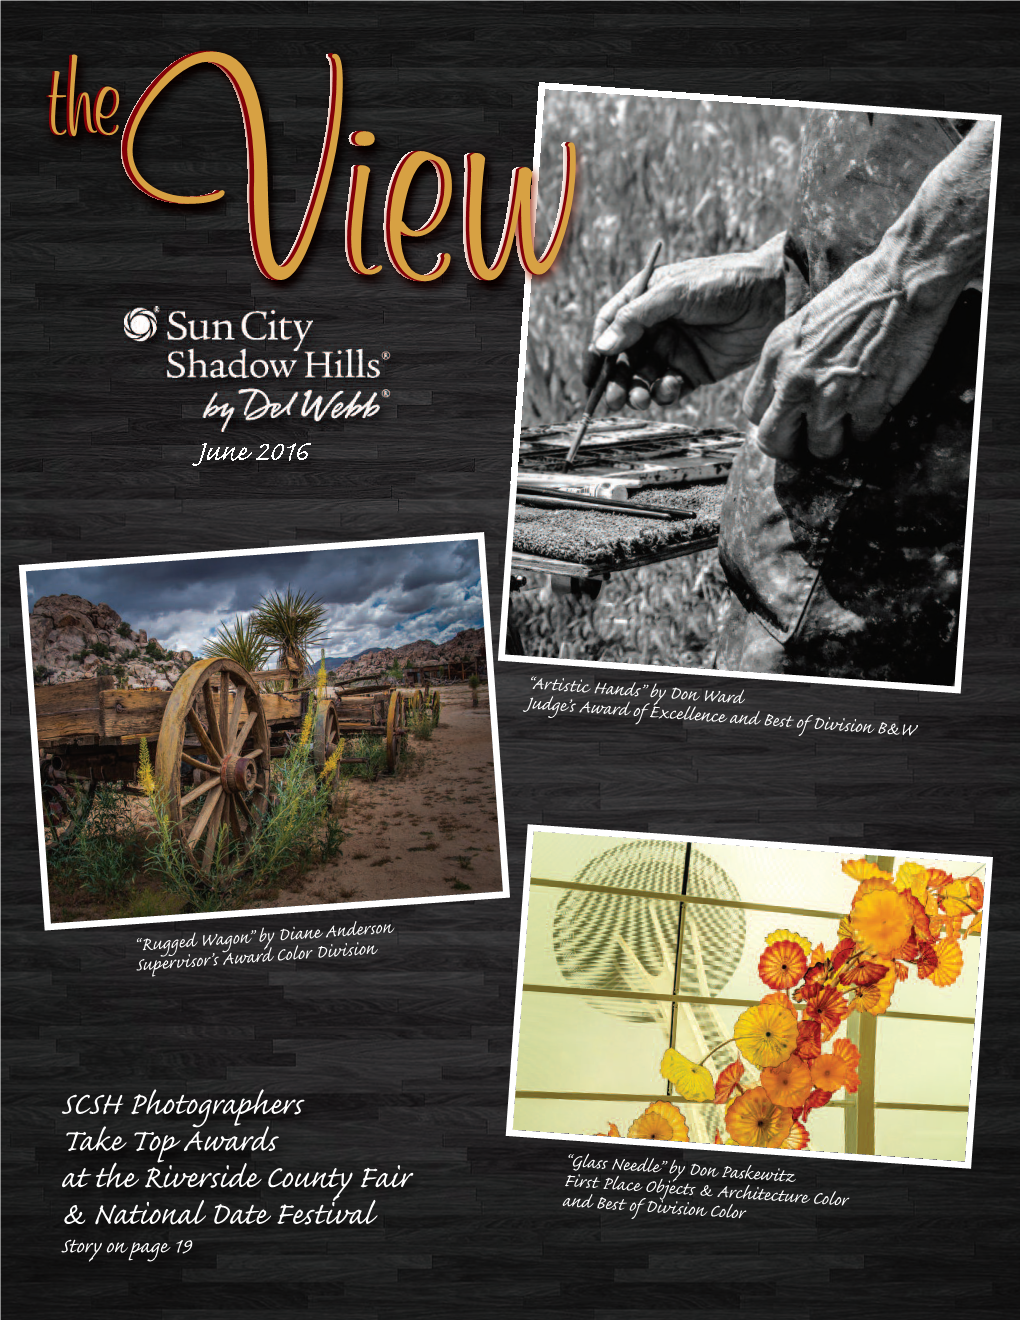 SCSH Photographers Take Top Awards at the Riverside County Fair & National Date Festival